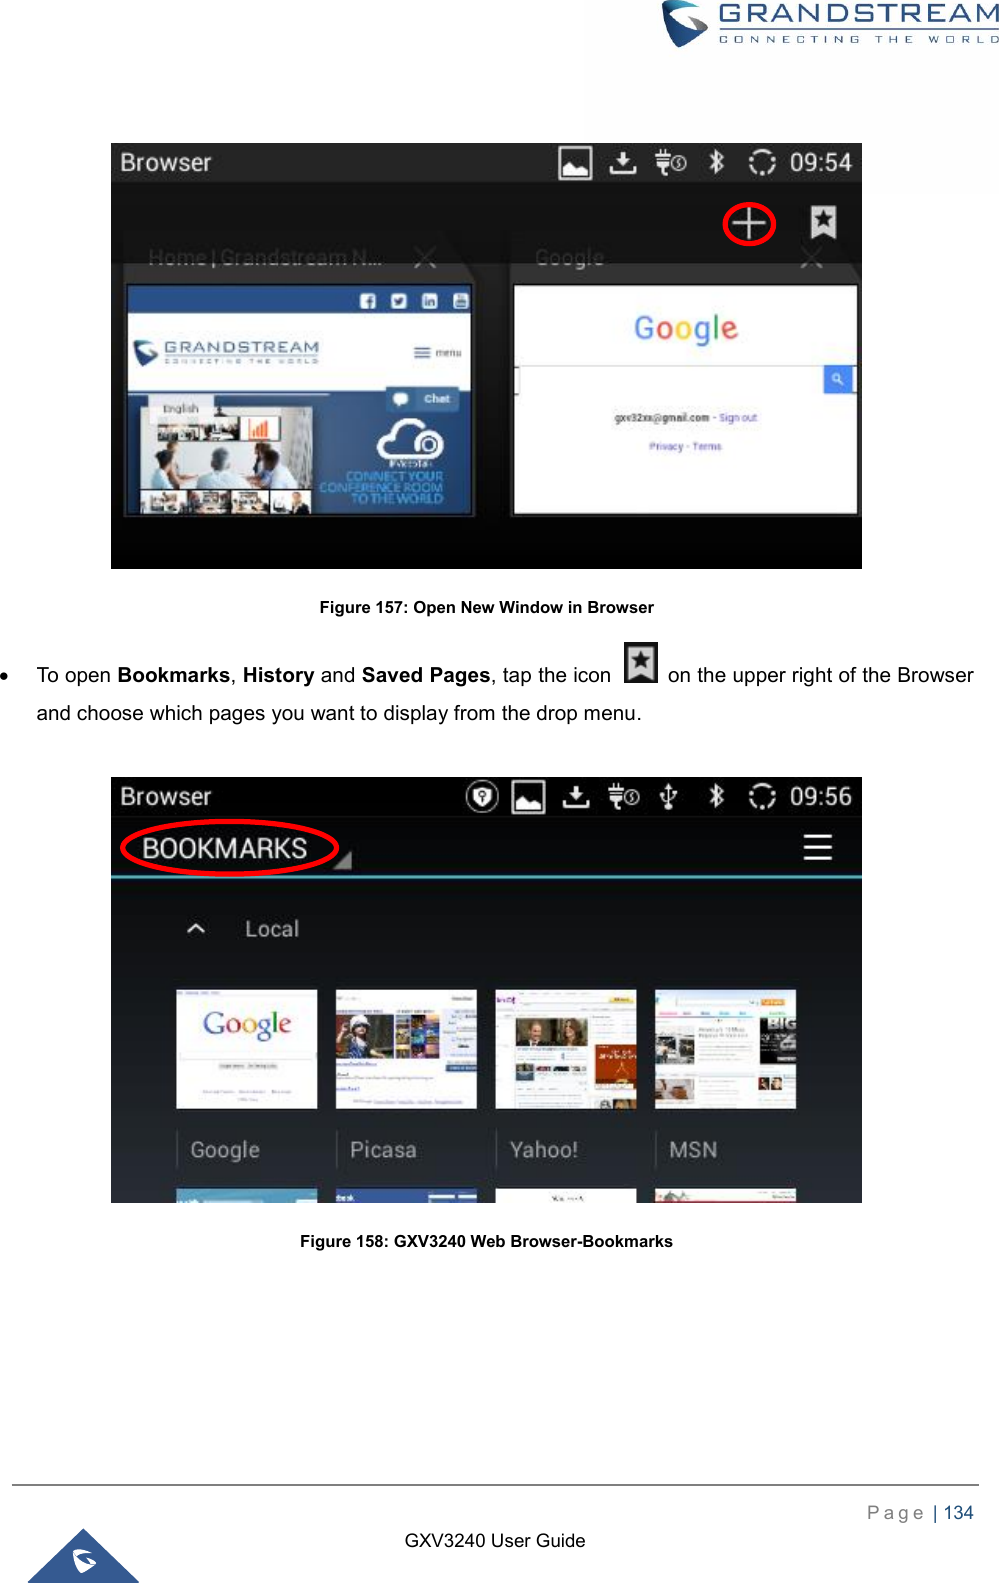    P a g e  | 134    GXV3240 User Guide    Figure 157: Open New Window in Browser   To open Bookmarks, History and Saved Pages, tap the icon    on the upper right of the Browser and choose which pages you want to display from the drop menu.   Figure 158: GXV3240 Web Browser-Bookmarks 